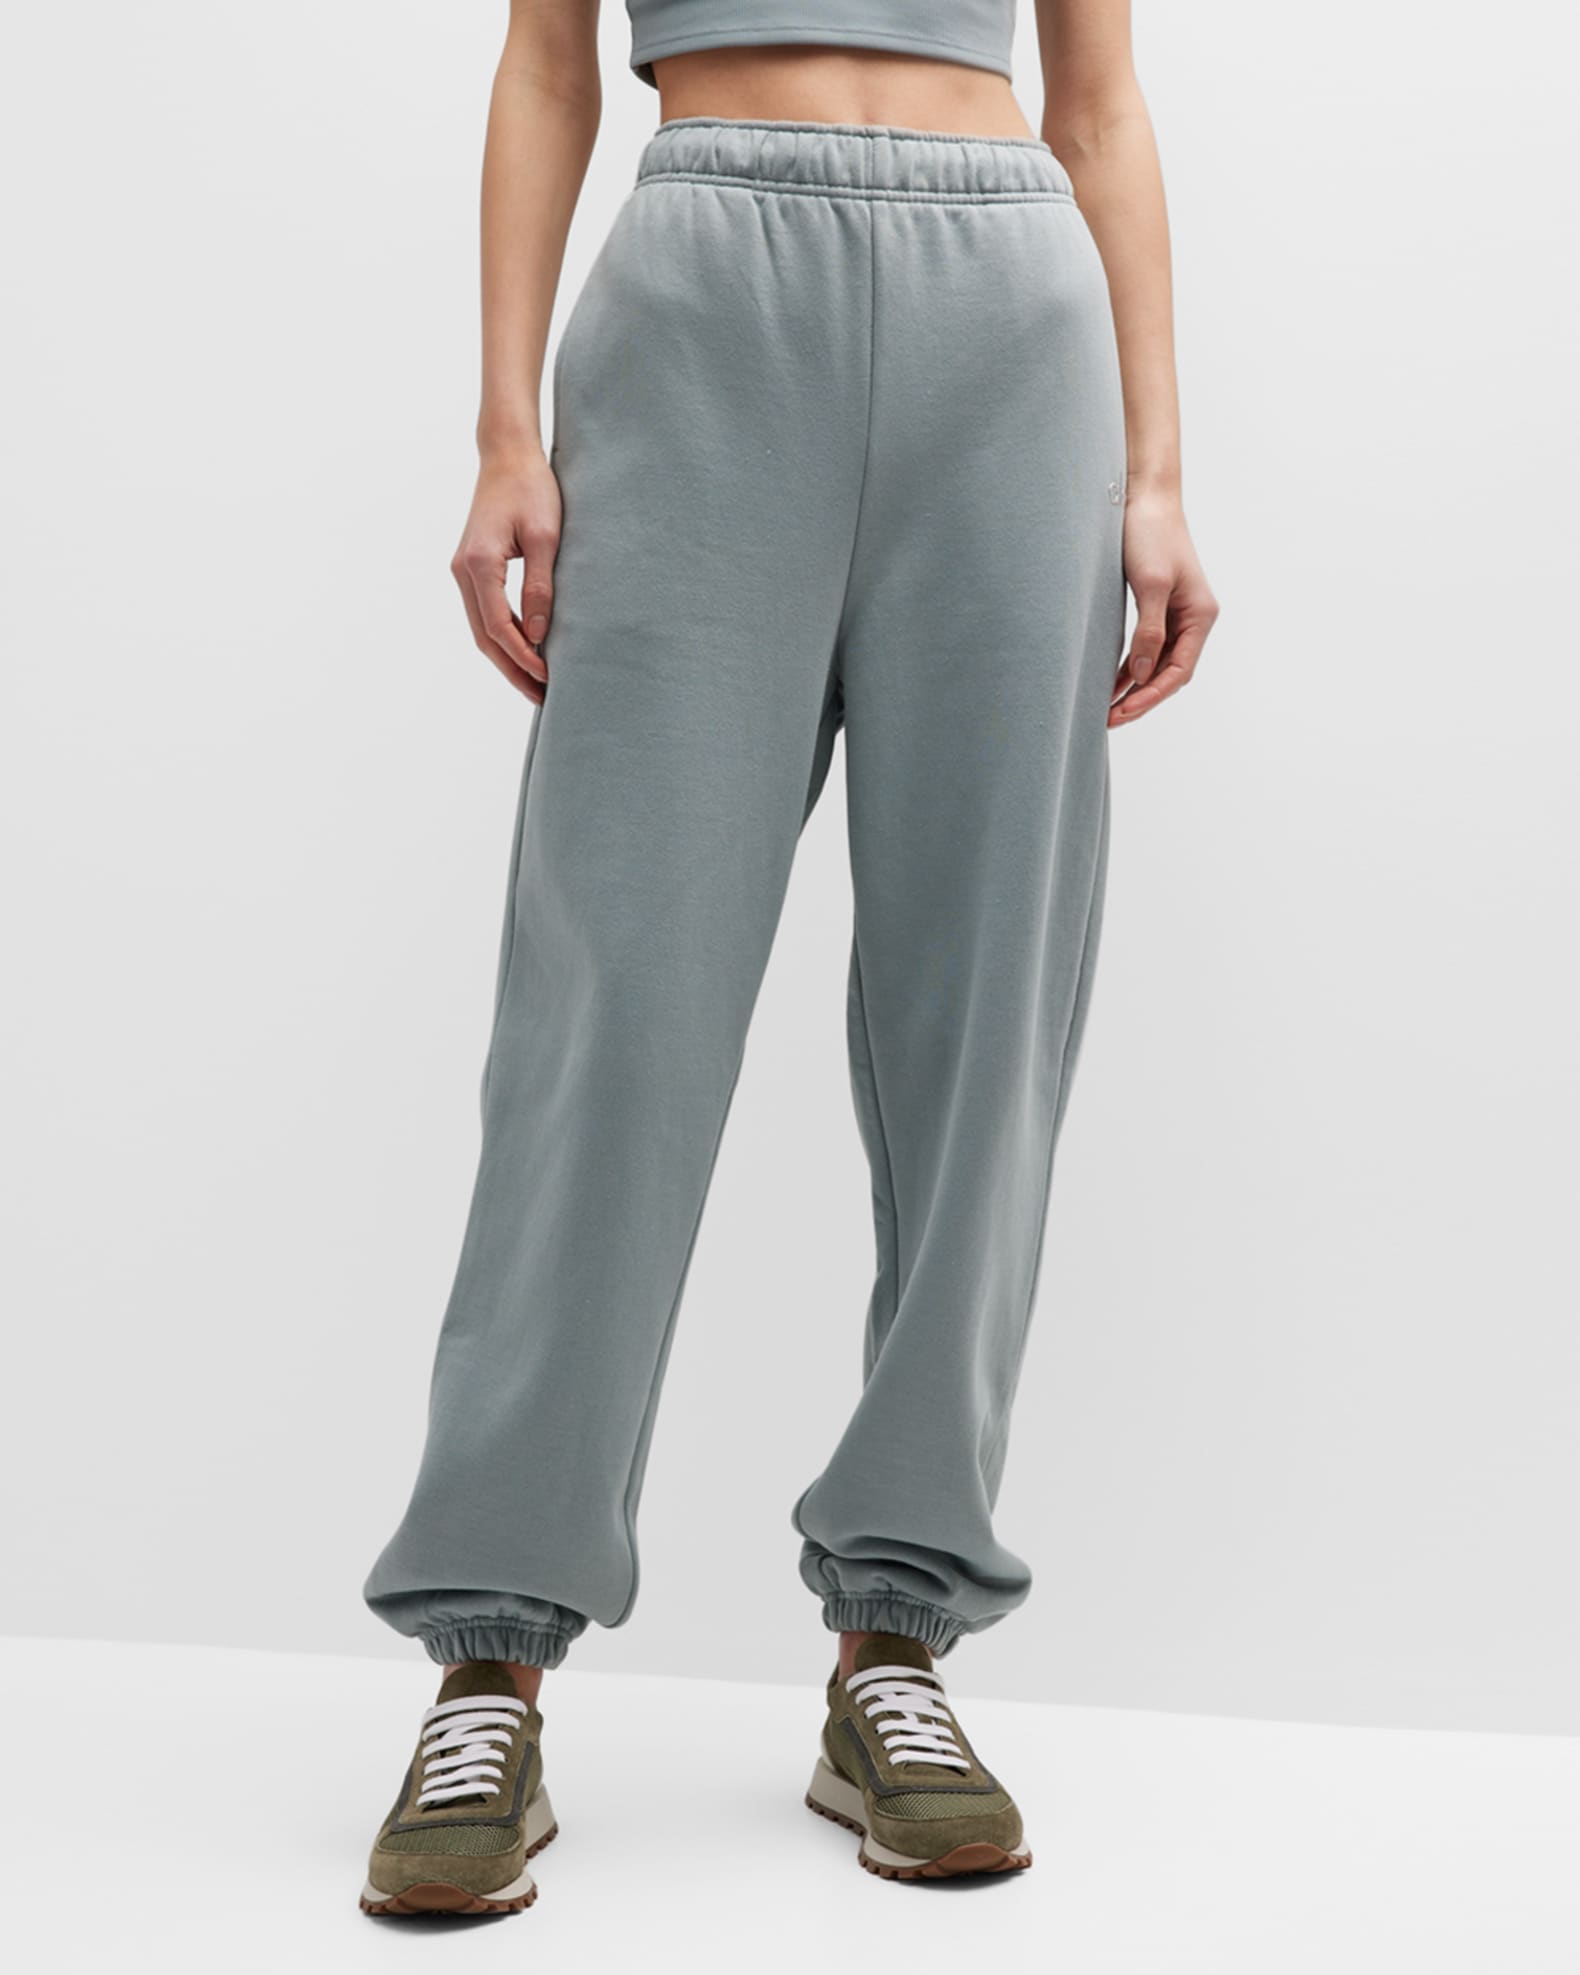 Alo Yoga Accolade French Terry Sweatpants